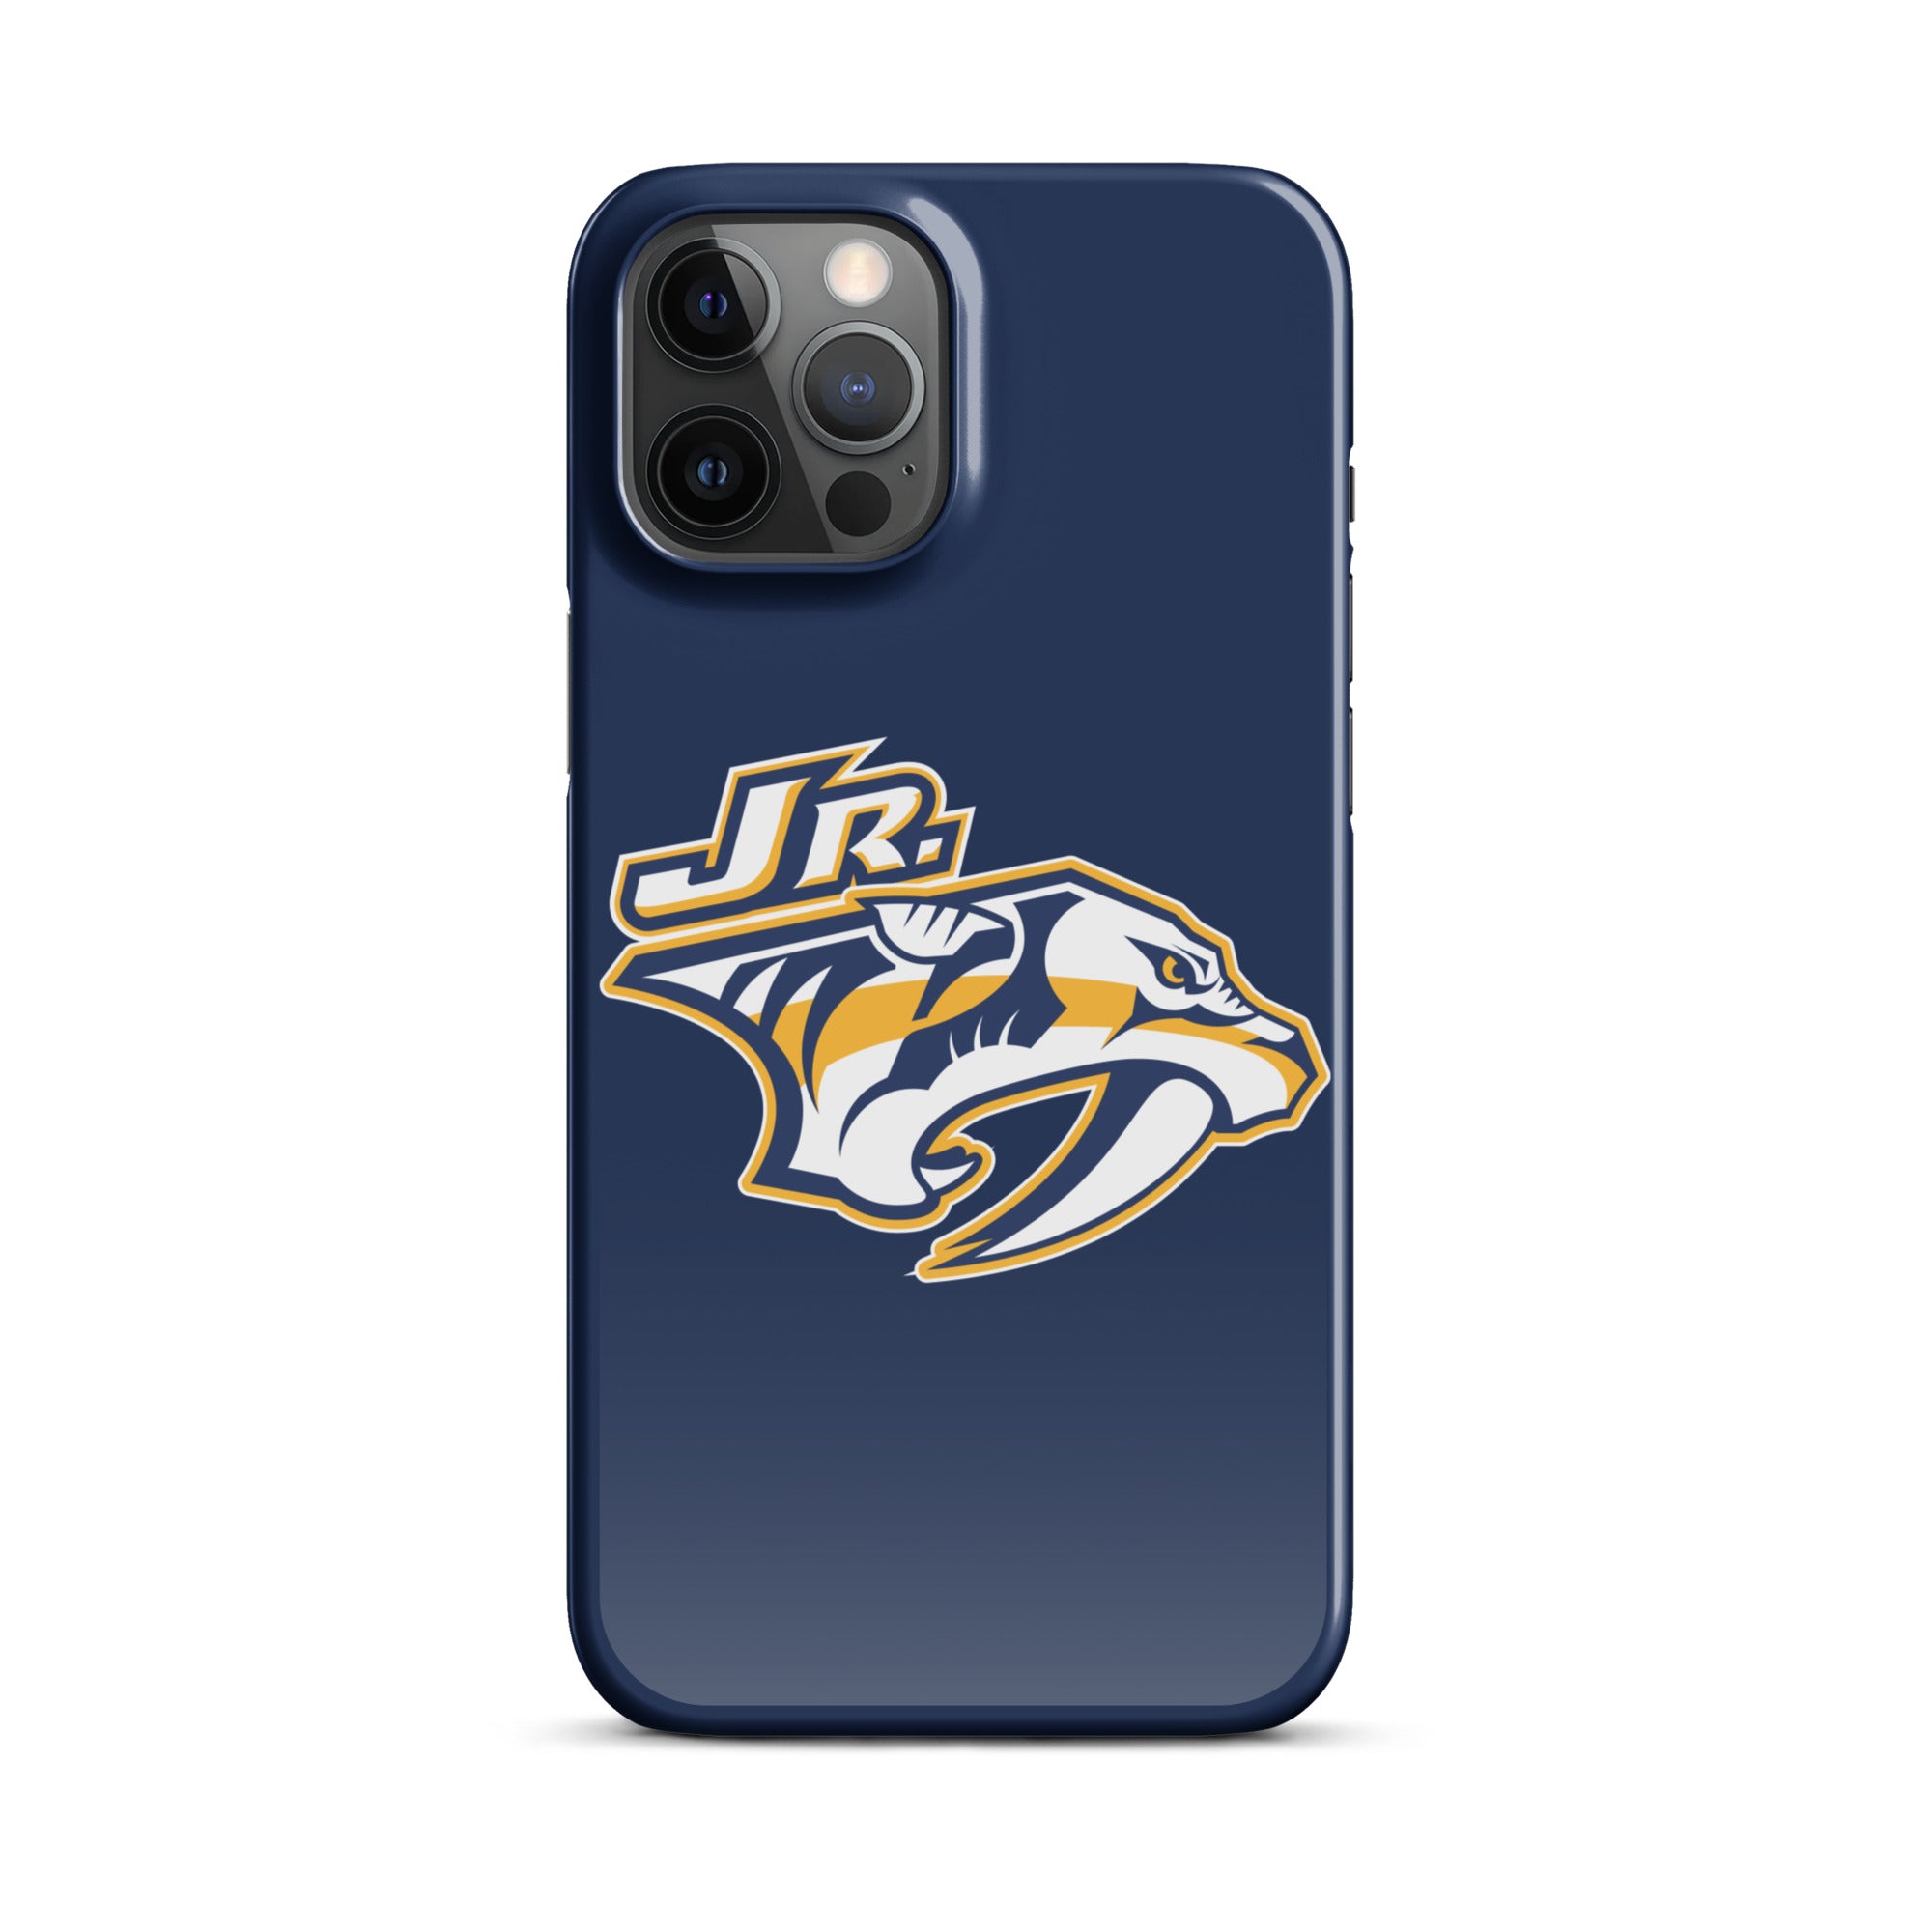 Jr Preds Snap case for iPhone®